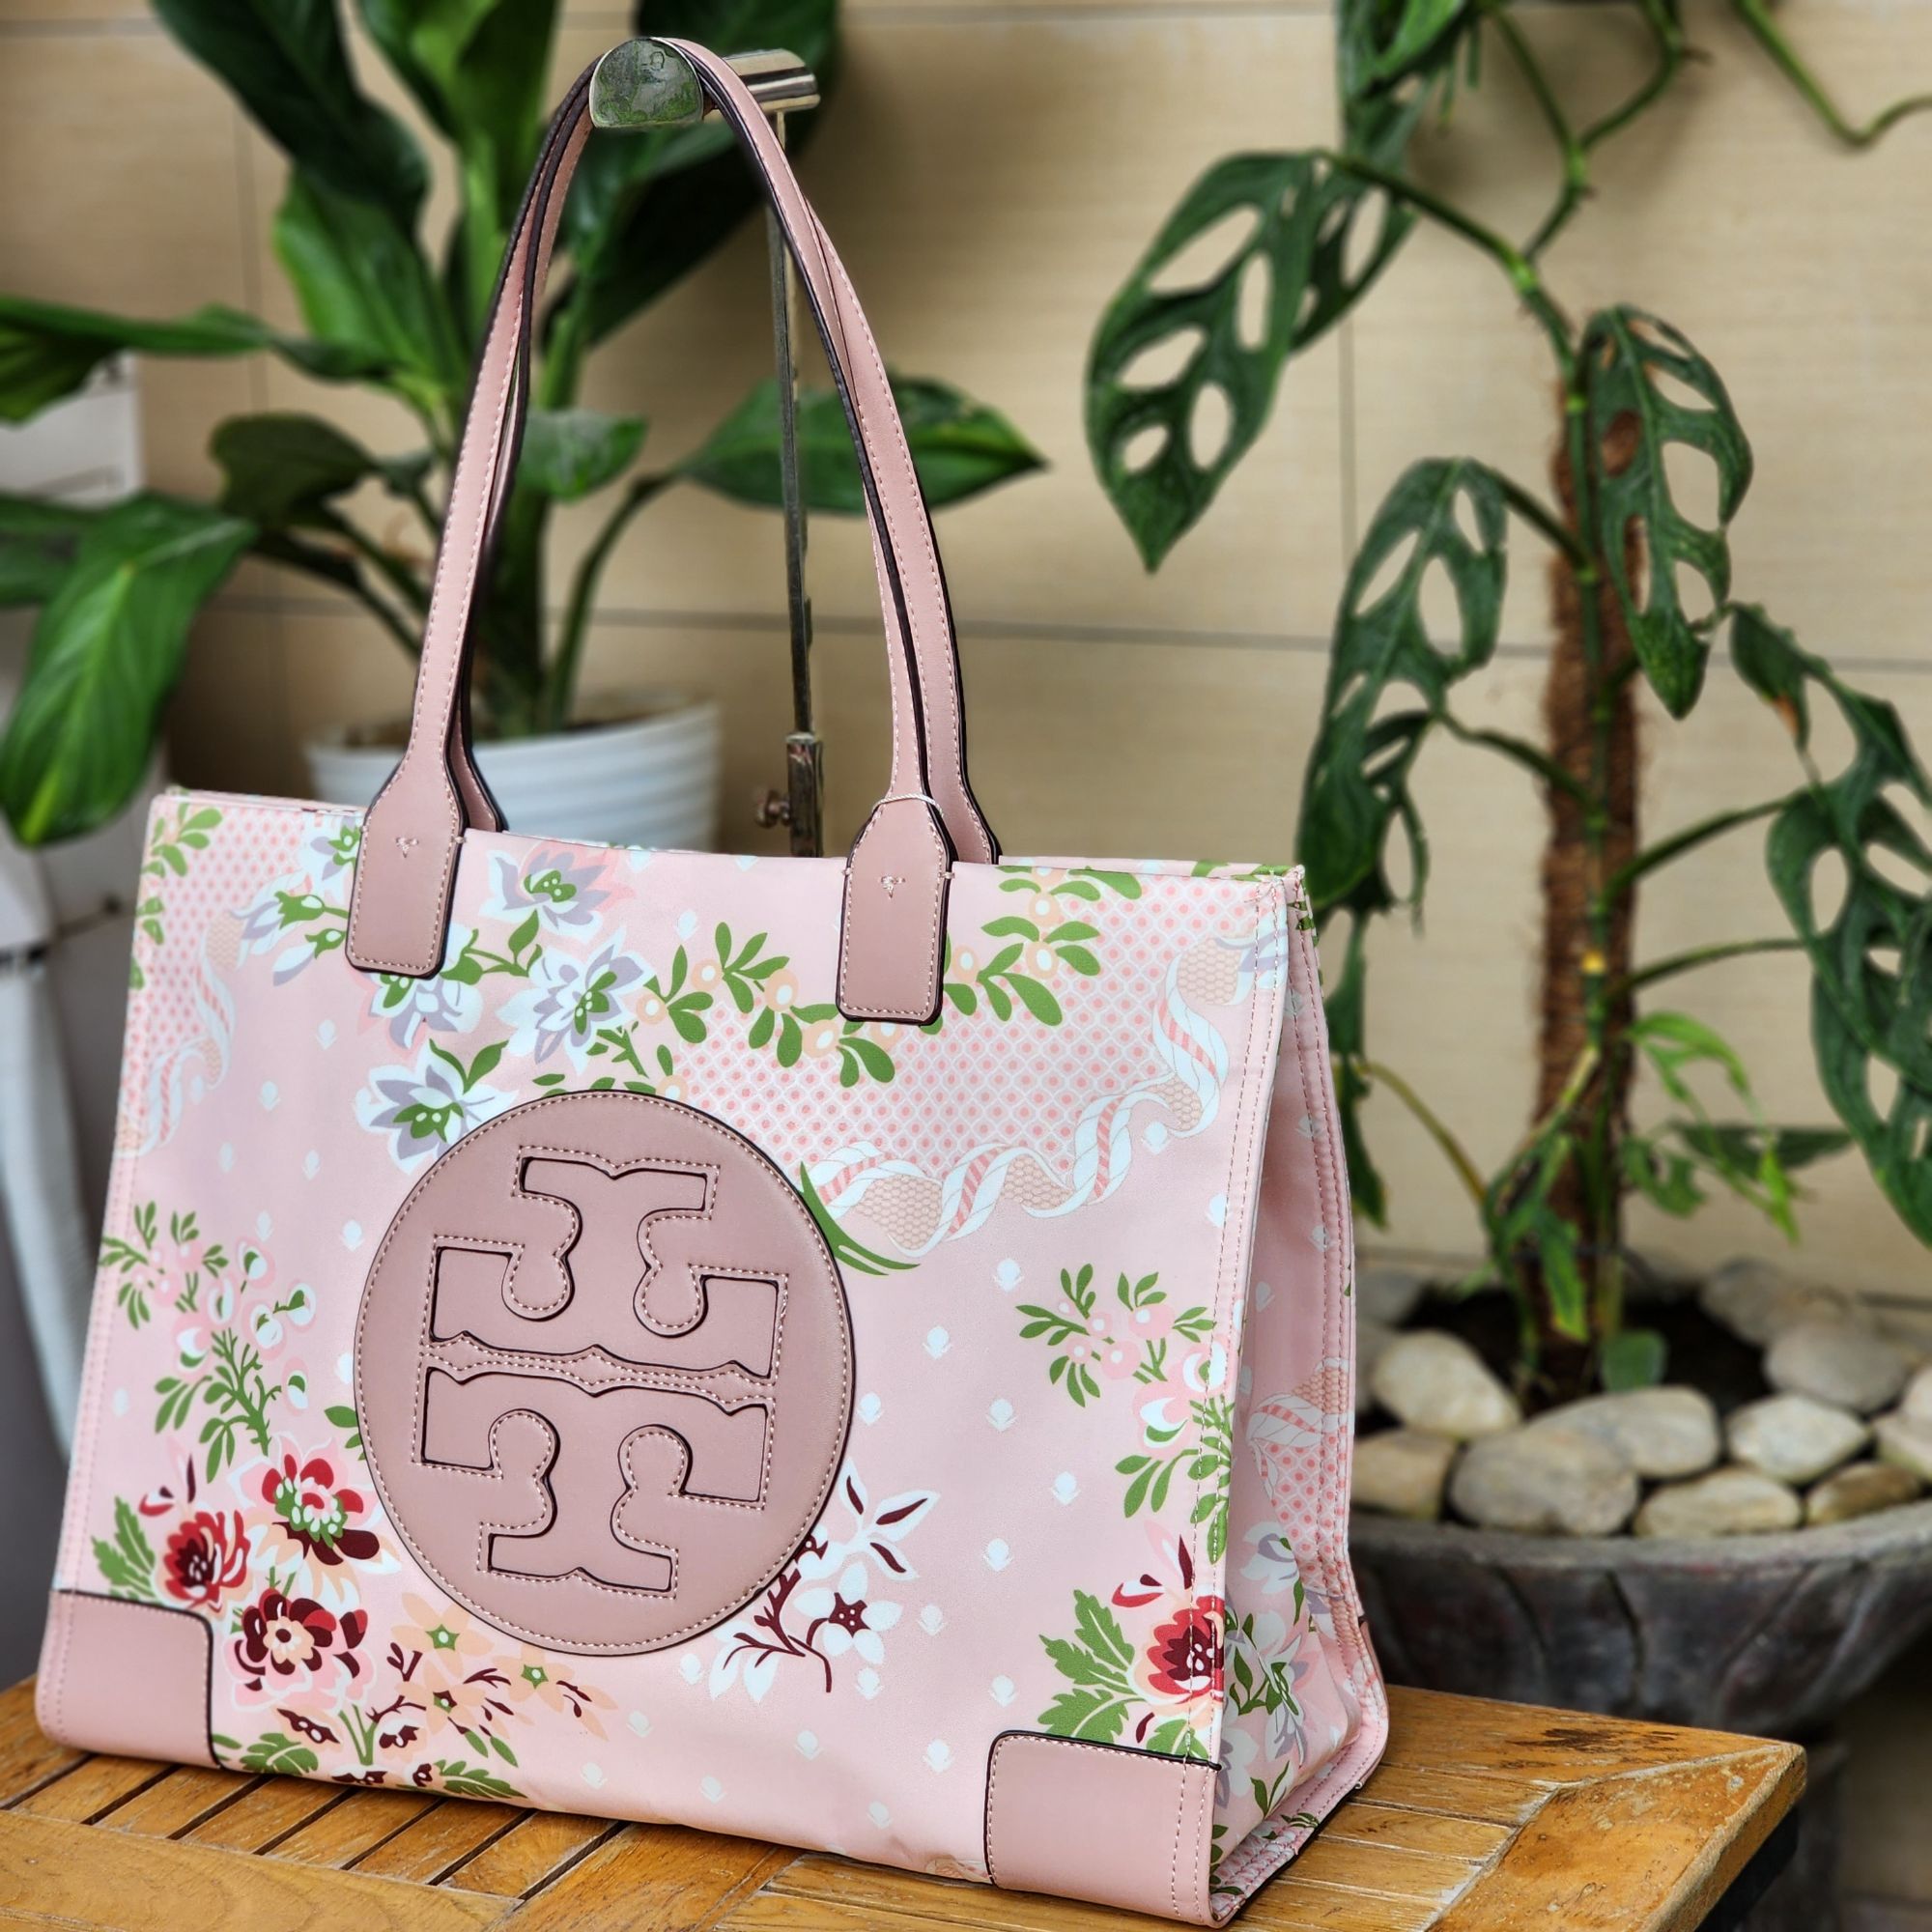 Tory Burch Ella Nylon Quilted Puffer Pink Sugar Berry Floral Tote Bag Purse  NWT